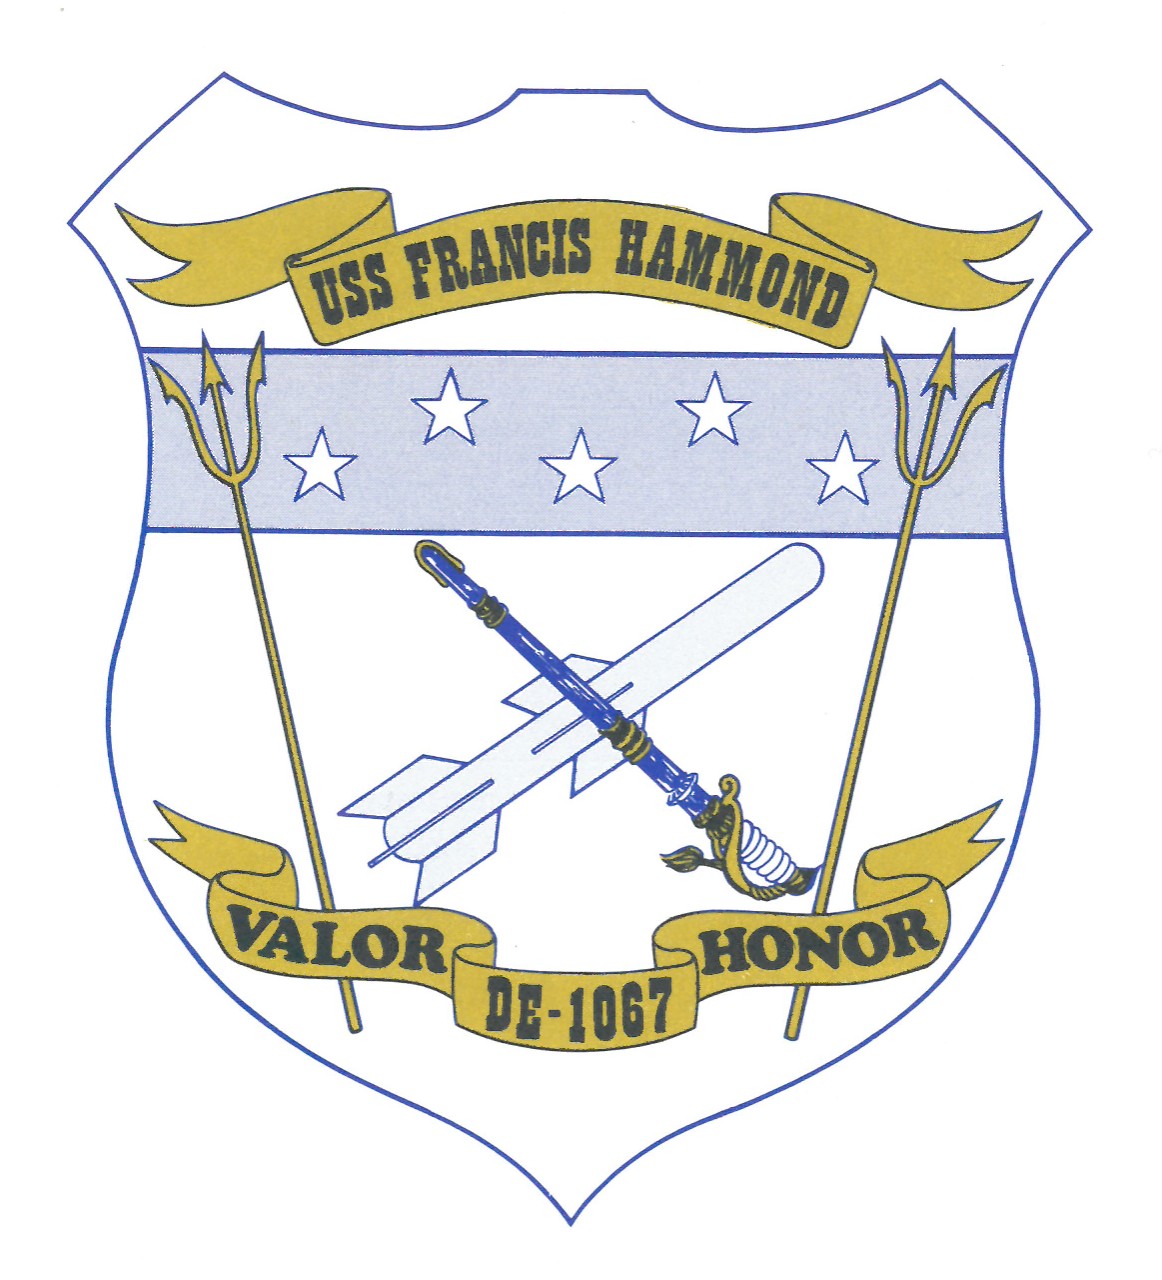 Francis Hammond’s insignia honors the life and deeds of HM3 Francis C. Hammond, as well as the ship’s own role in protecting the United States.  Shaped similar to a hospital corpsman’s badge, the crest bears a blue stripe with five stars symbolizing the Medal of Honor that was awarded to Hammond.  Two tridents, long a symbol of Neptune and the “Rule of the Deep”, sit at each end of this stripe, their three prongs representing Francis Hammond’s anti-submarine warfare (ASW) armament: the ASROC, the torpedo, and the helicopter.  The objects sitting at the center also symbolize this function, with the missile representing the ship’s ASW functions and the sword its might and readiness.  The latter is sheathed, however, in order to emphasize the defensive nature of this might.  Finally, the ship’s motto “Valor, Honor” refers to both Hammond’s personal gallantry and the manner in which the crew was expected to discharge their duties.  